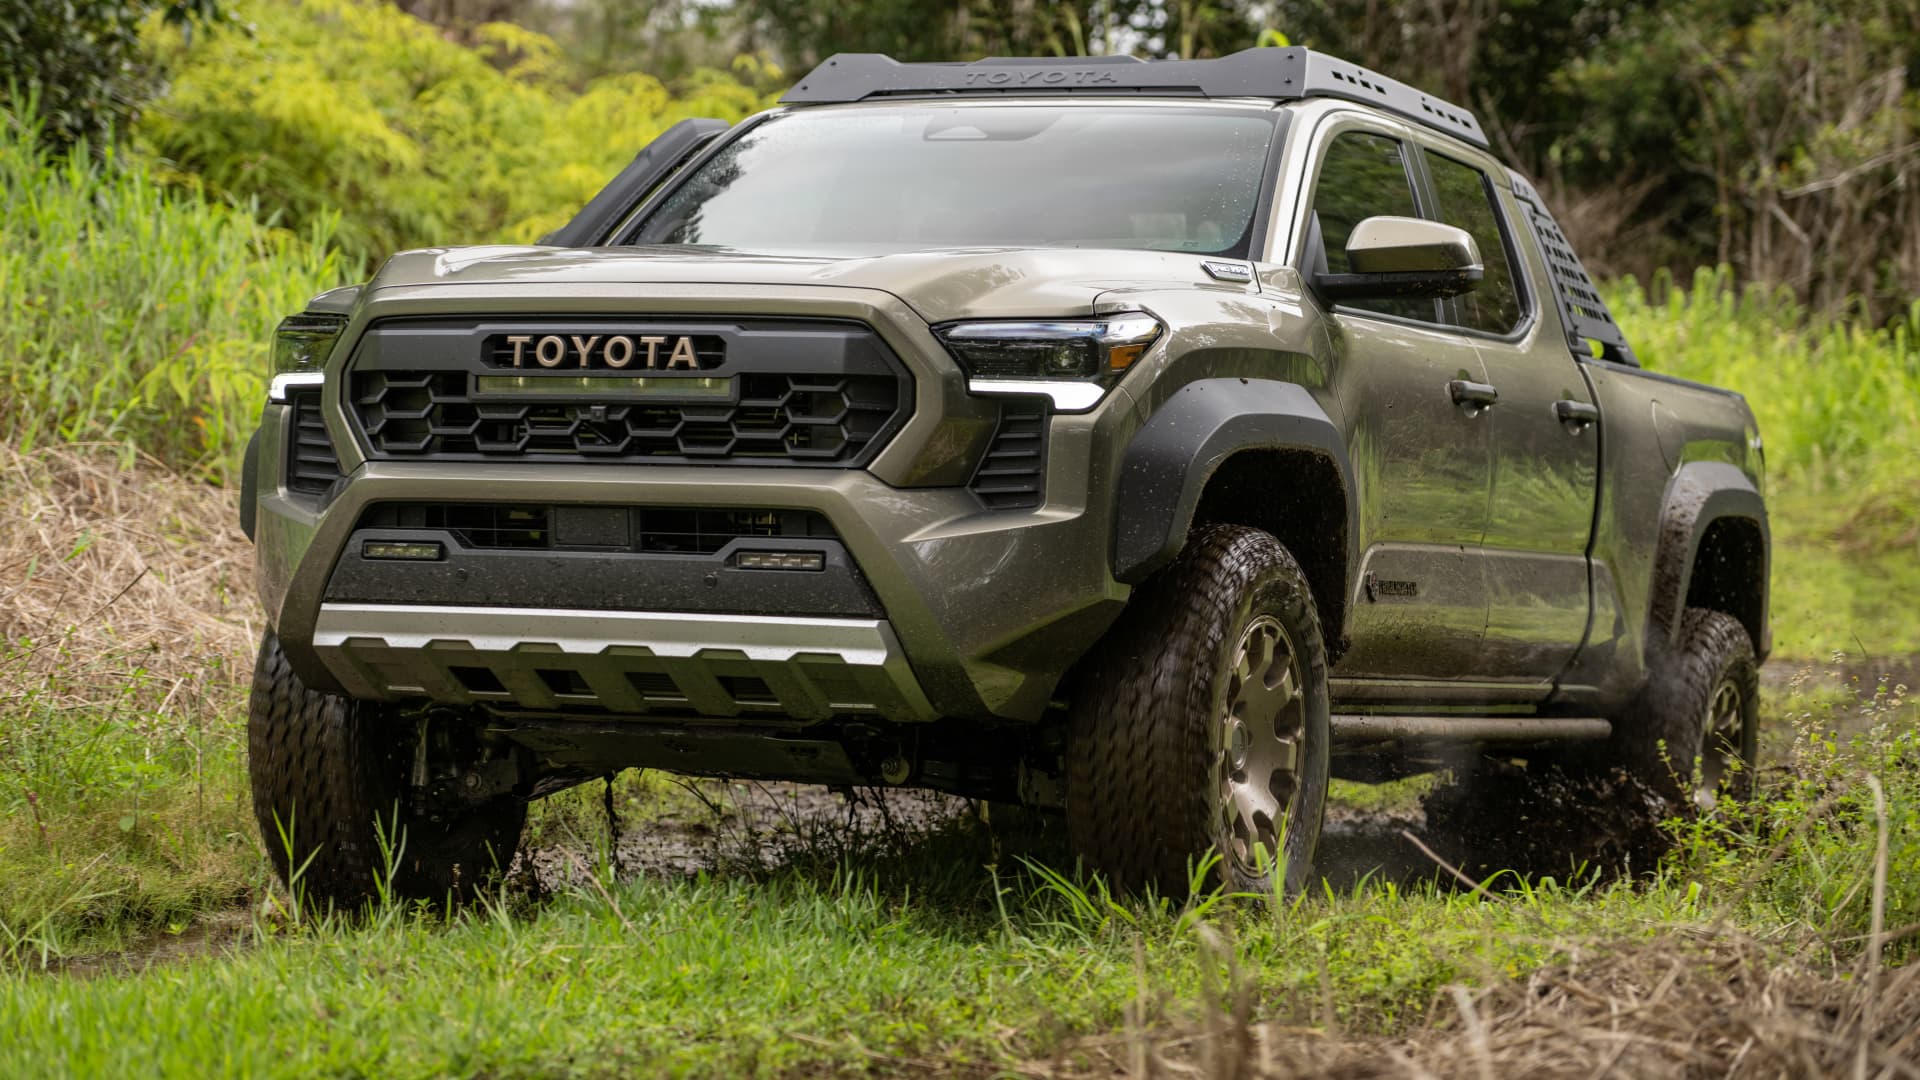 Toyota may presumably introduce electric, plug-in Tacoma and Tundra pickups